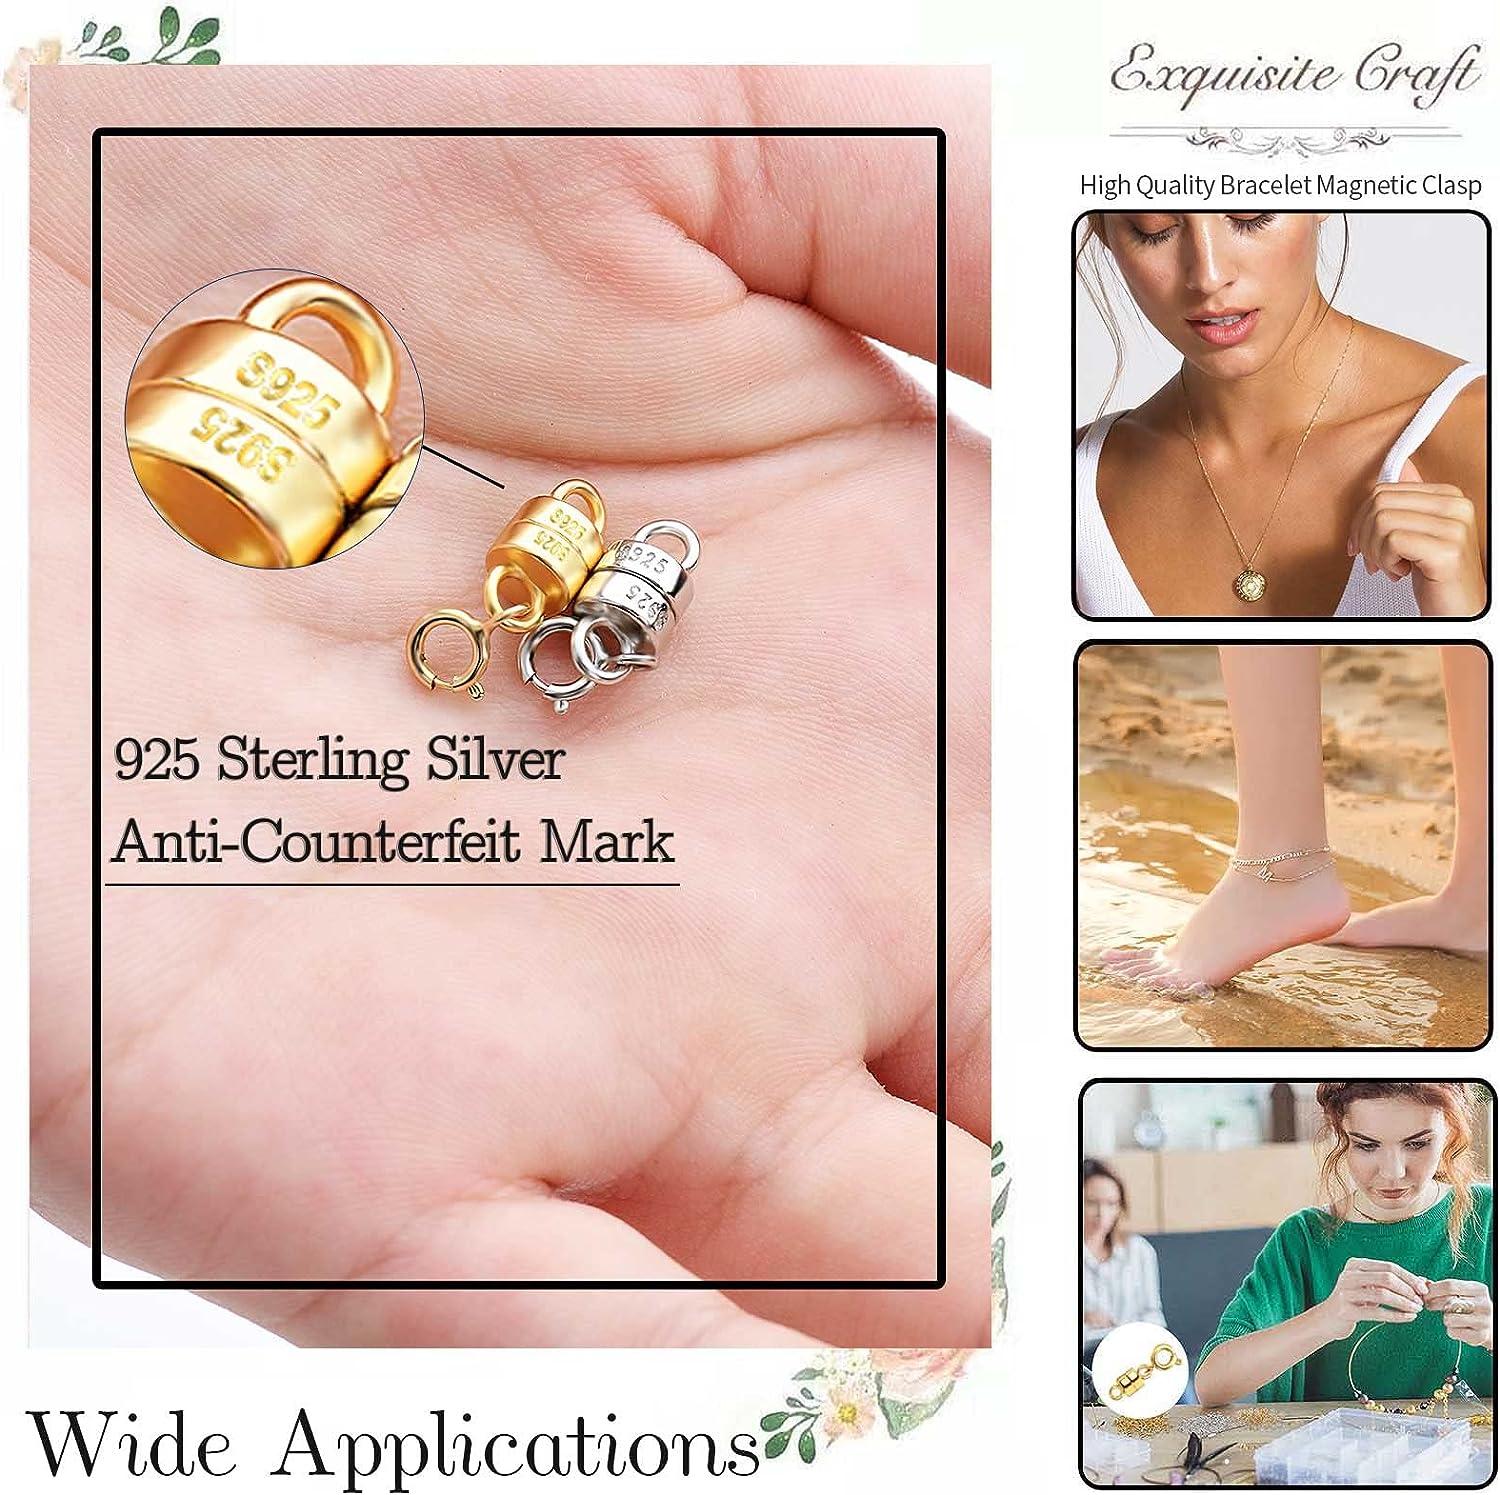 Jewelry Clasps, Clasp Findings Manufacturer